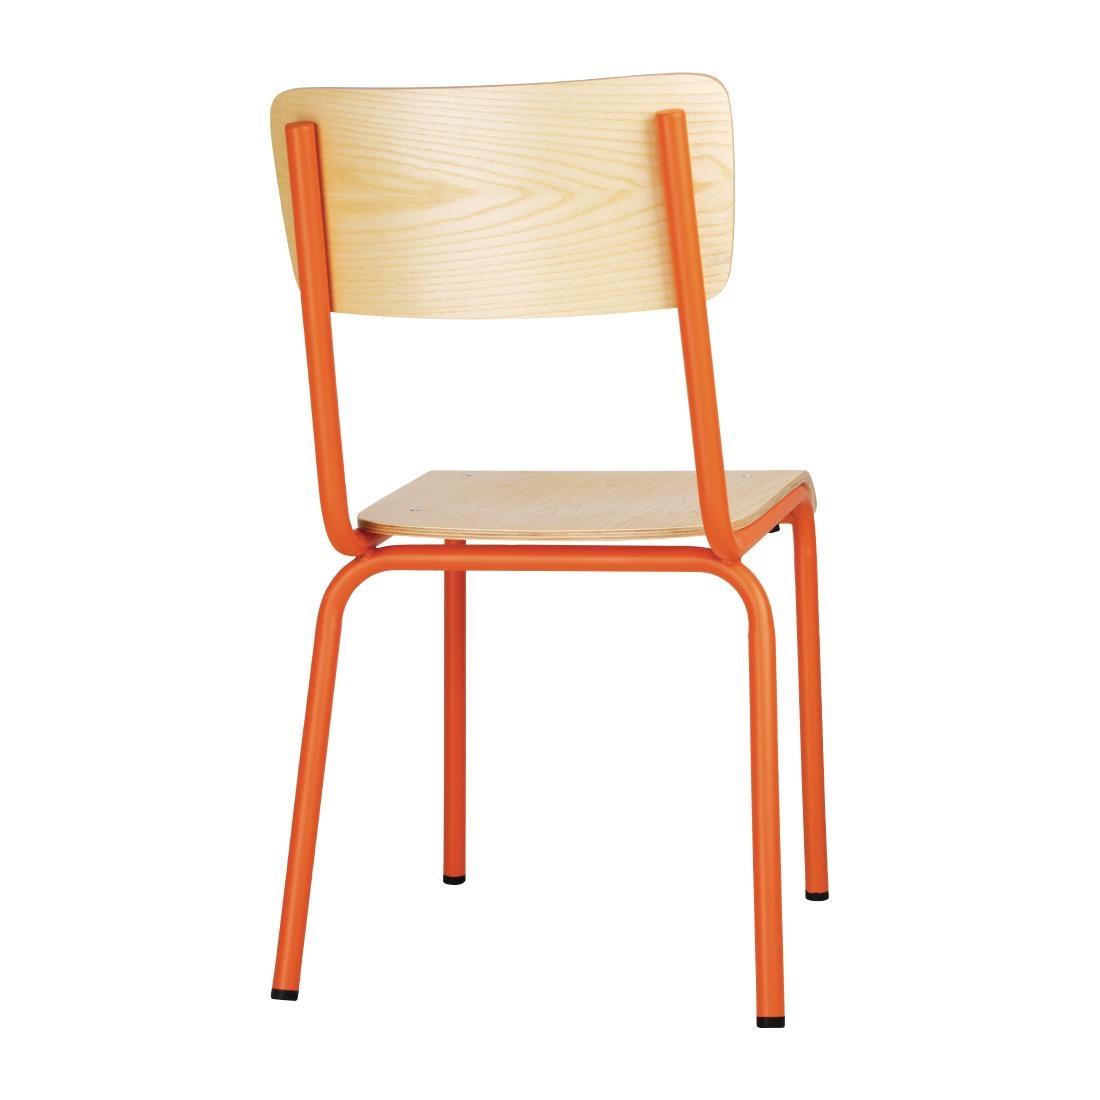 Bolero Cantina Side Chairs with Wooden Seat Pad and Backrest Orange (Pack of 4) - FB947  - 3